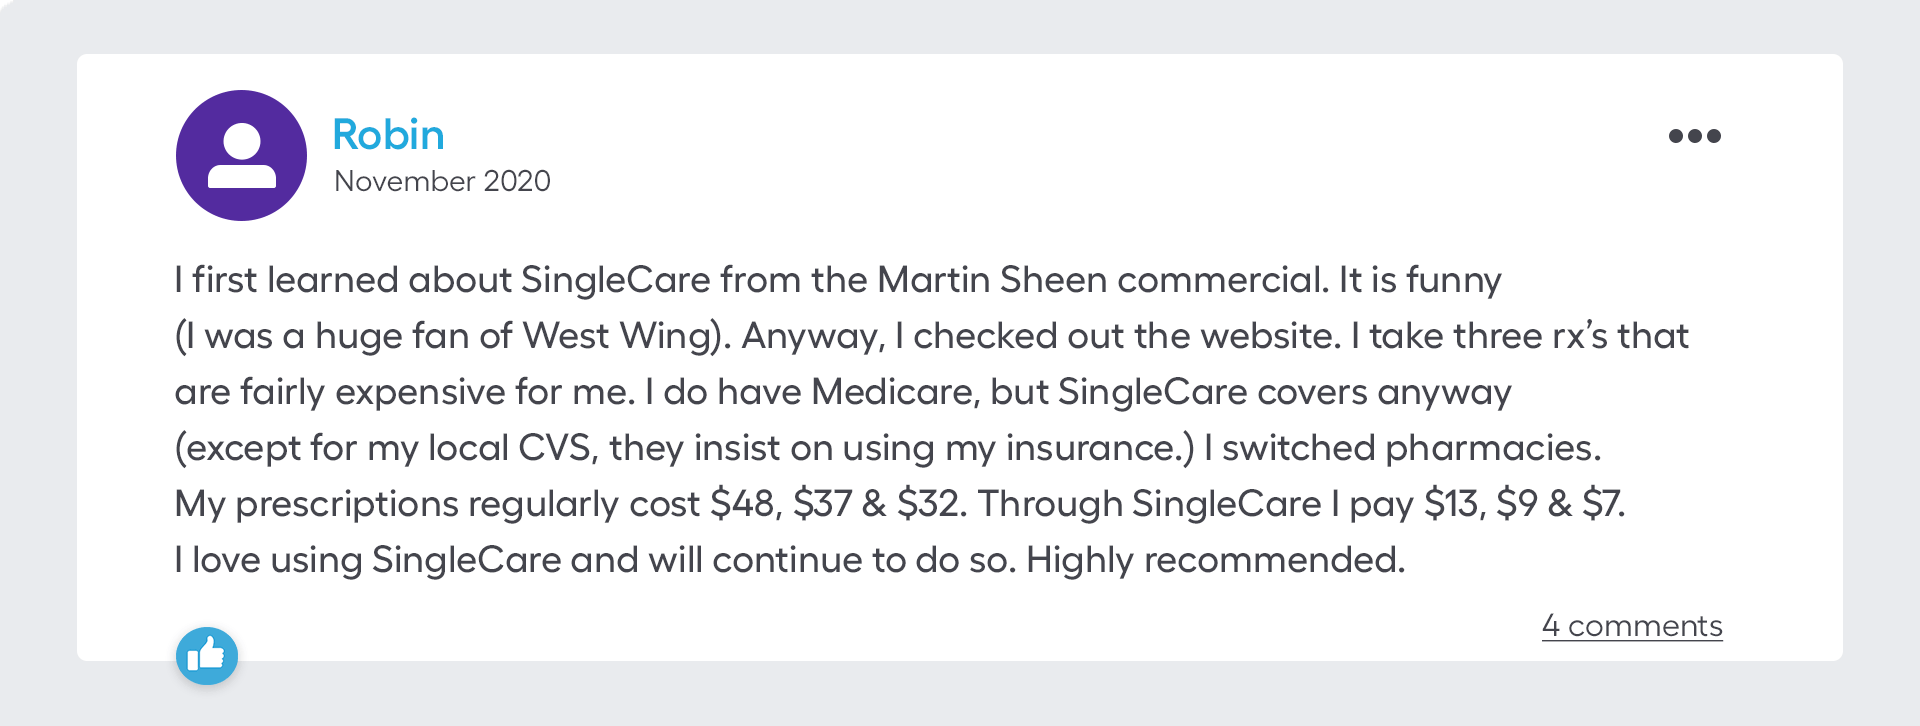 I first learned about SingleCare from the Martin Sheen commercial. It is funny (I was a huge fan of West Wing). Anyway, I checked out the website. I take three rx’s that are fairly expensive for me. I do have Medicare, but SingleCare covers anyway (except for my local CVS, they insist on using my insurance.) I switched pharmacies. My prescriptions regularly cost $48, $37 & $32. Through SingleCare I pay $13, $9 & $7. I love using SingleCare and will continue to do so. Highly recommended.